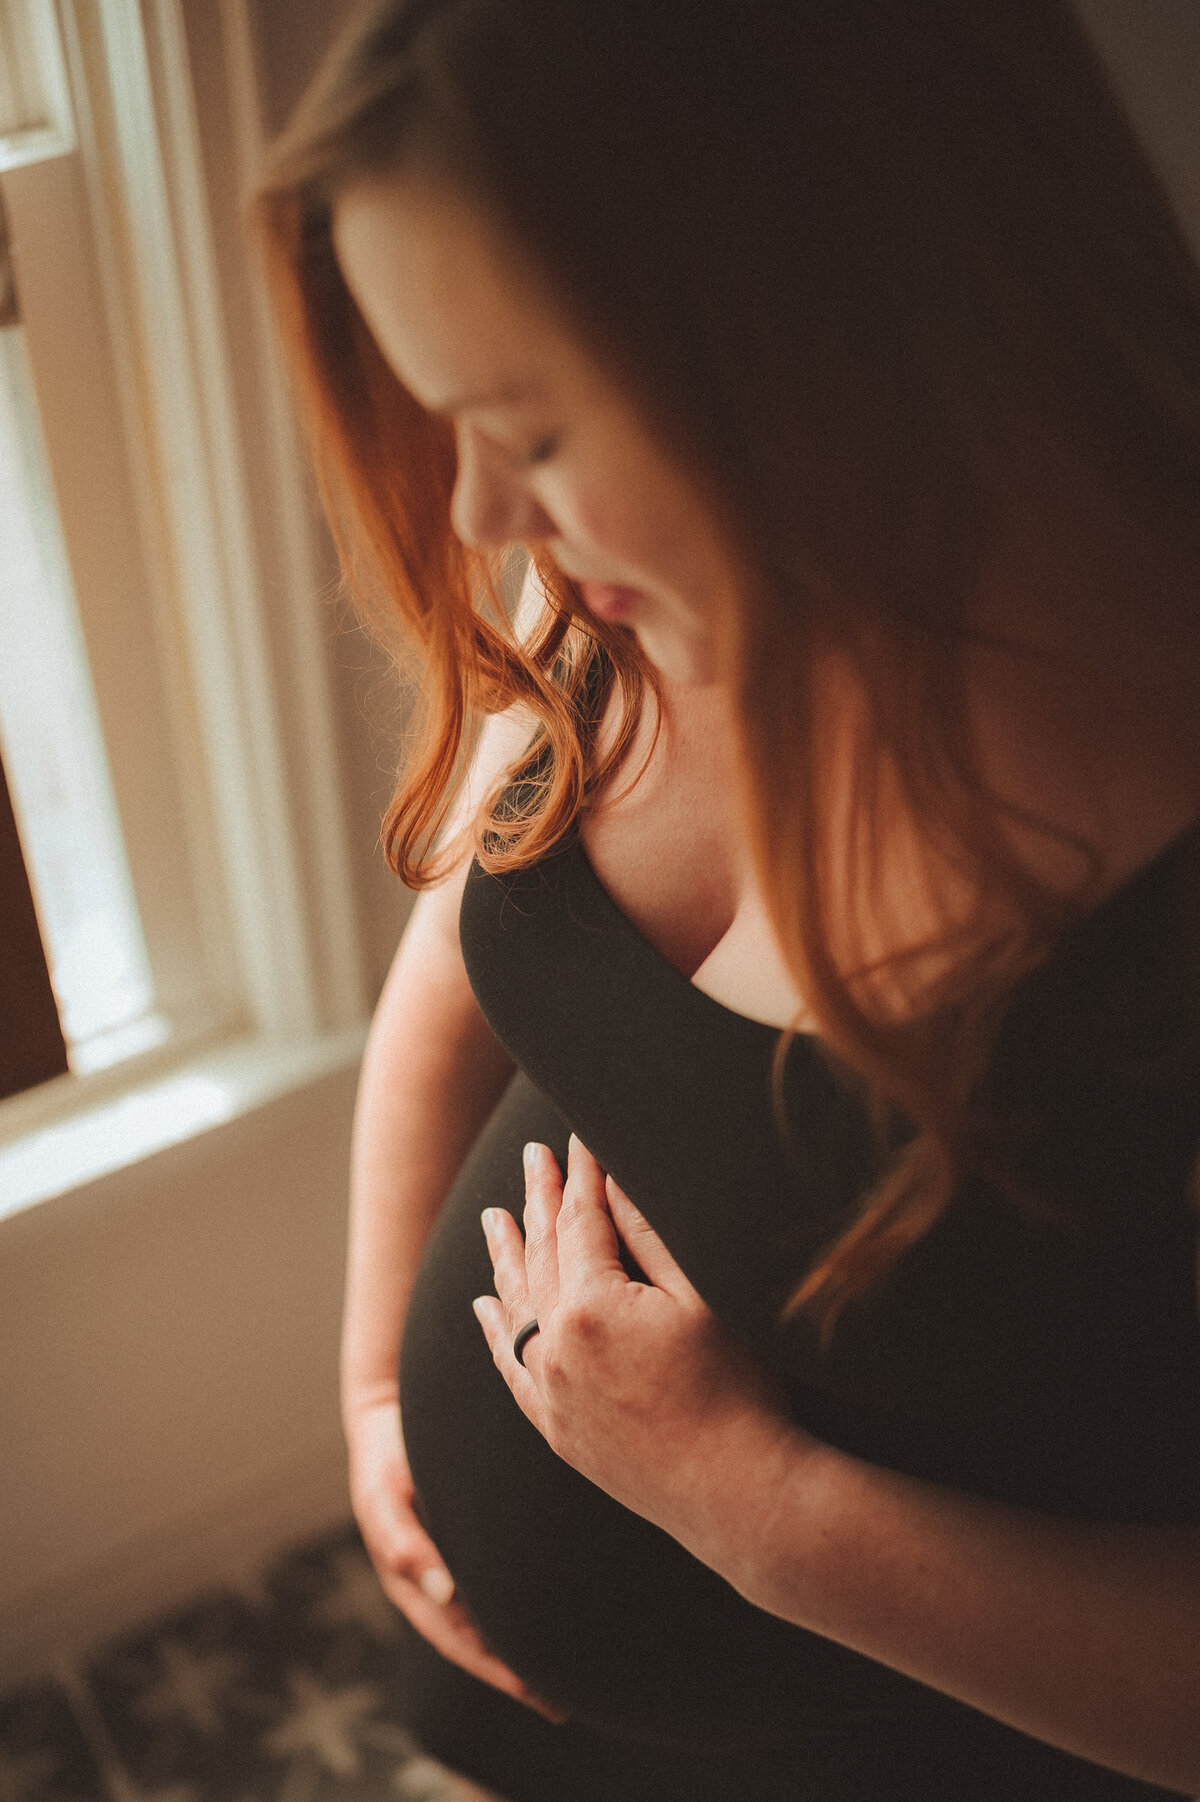 Embark on cozy beginnings with in-home maternity portraits in Minneapolis. Shannon Kathleen Photography transforms your space into a warm haven for capturing the essence of your journey